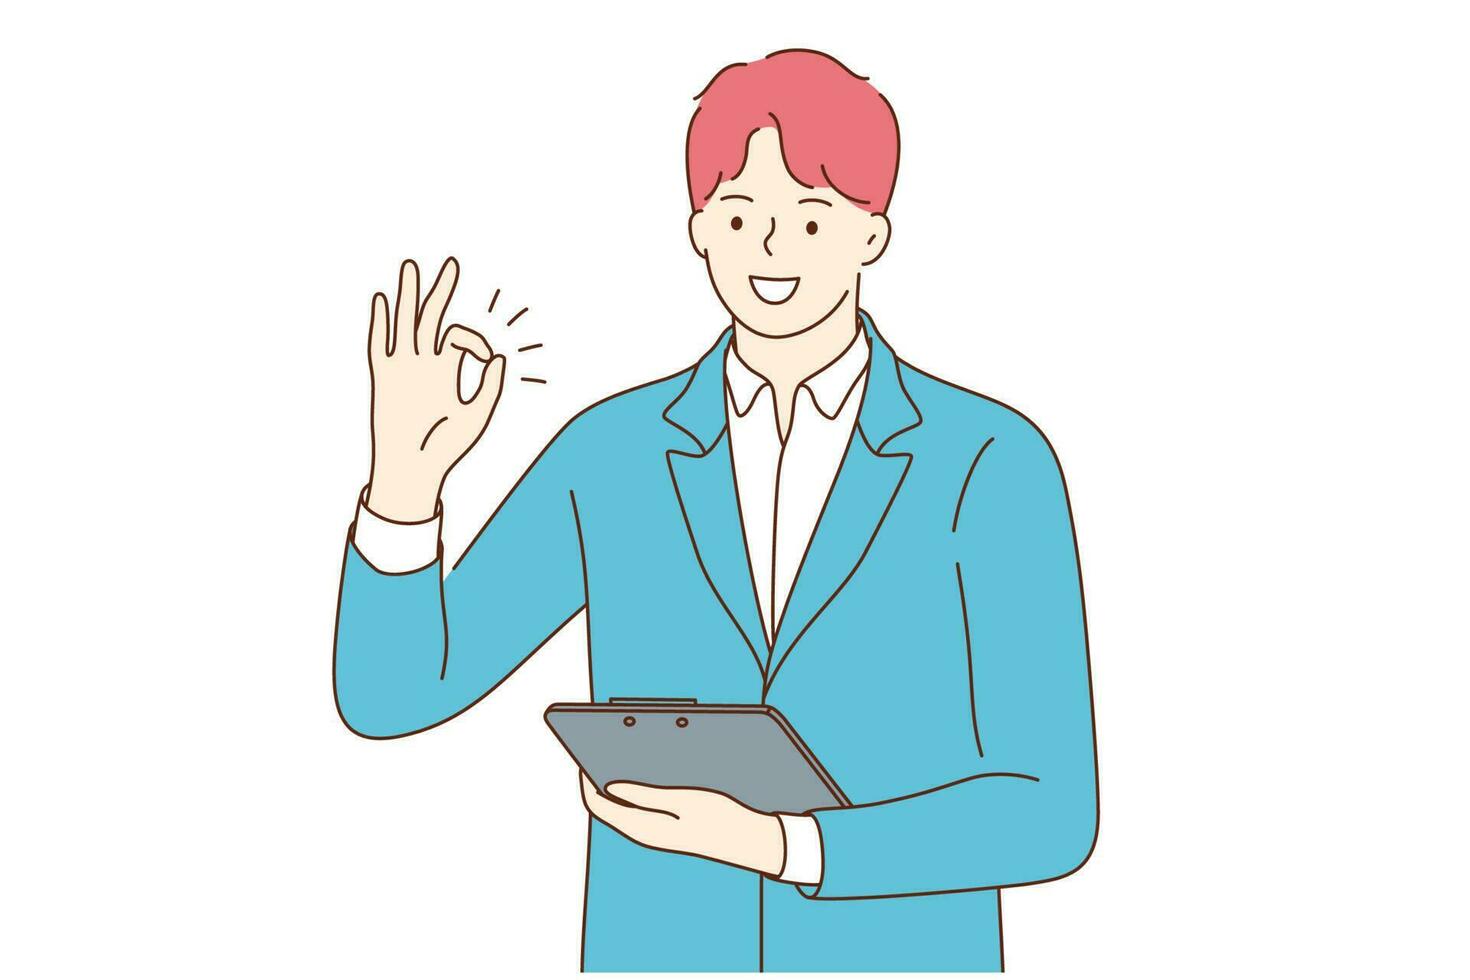 Success, business, approval, work, goal achievement. Young happy positive smiling businessman clerk manager cartoon character standing with tablet and showing ok sign looking at camera illustration. vector